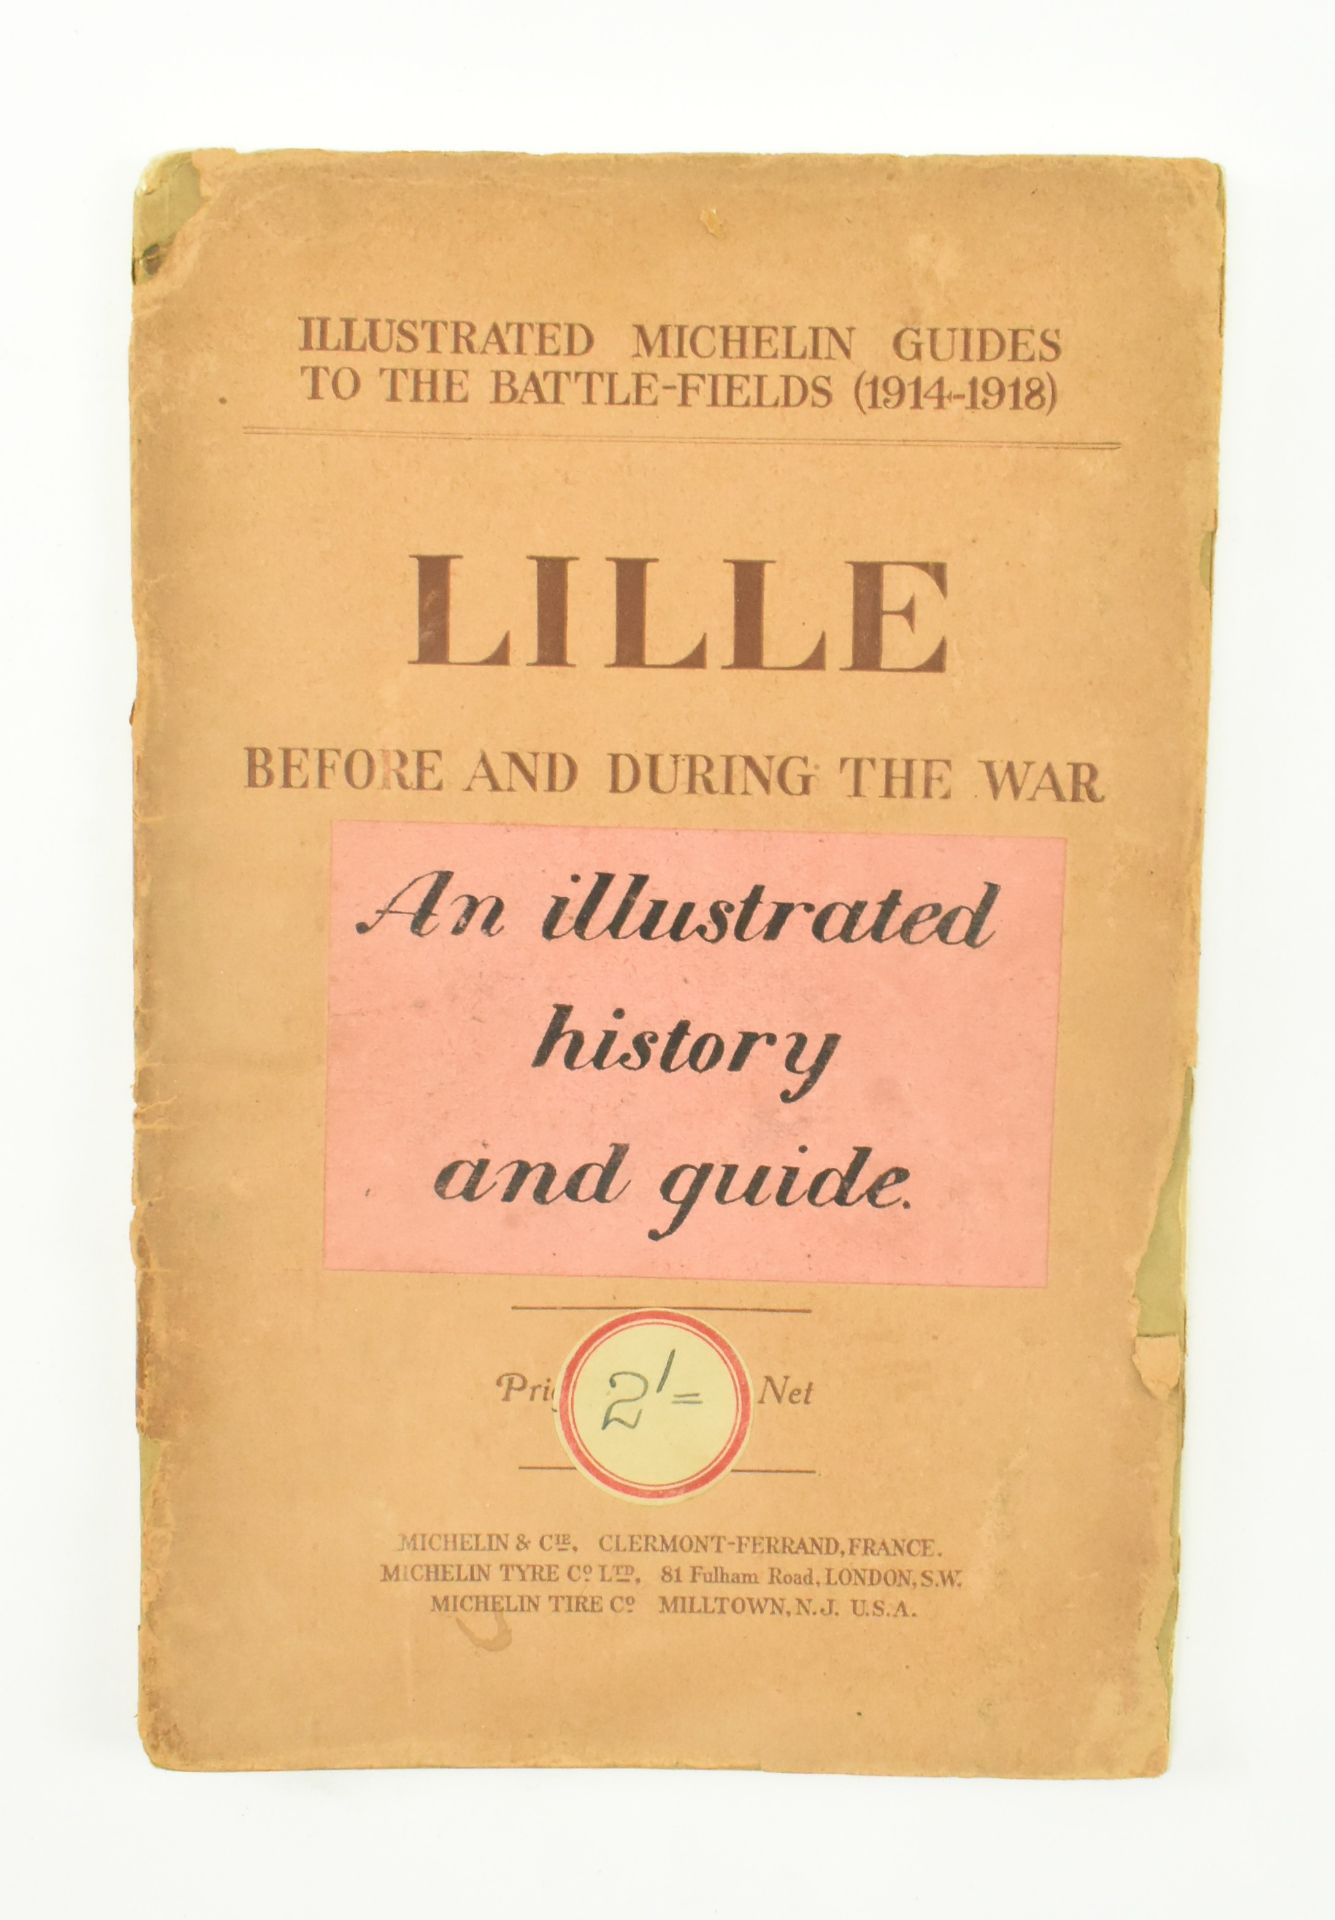 WW1 HISTORY. 11 ILLUSTRATED MICHELIN GUIDES TO THE BATTLEFIELDS - Image 9 of 16